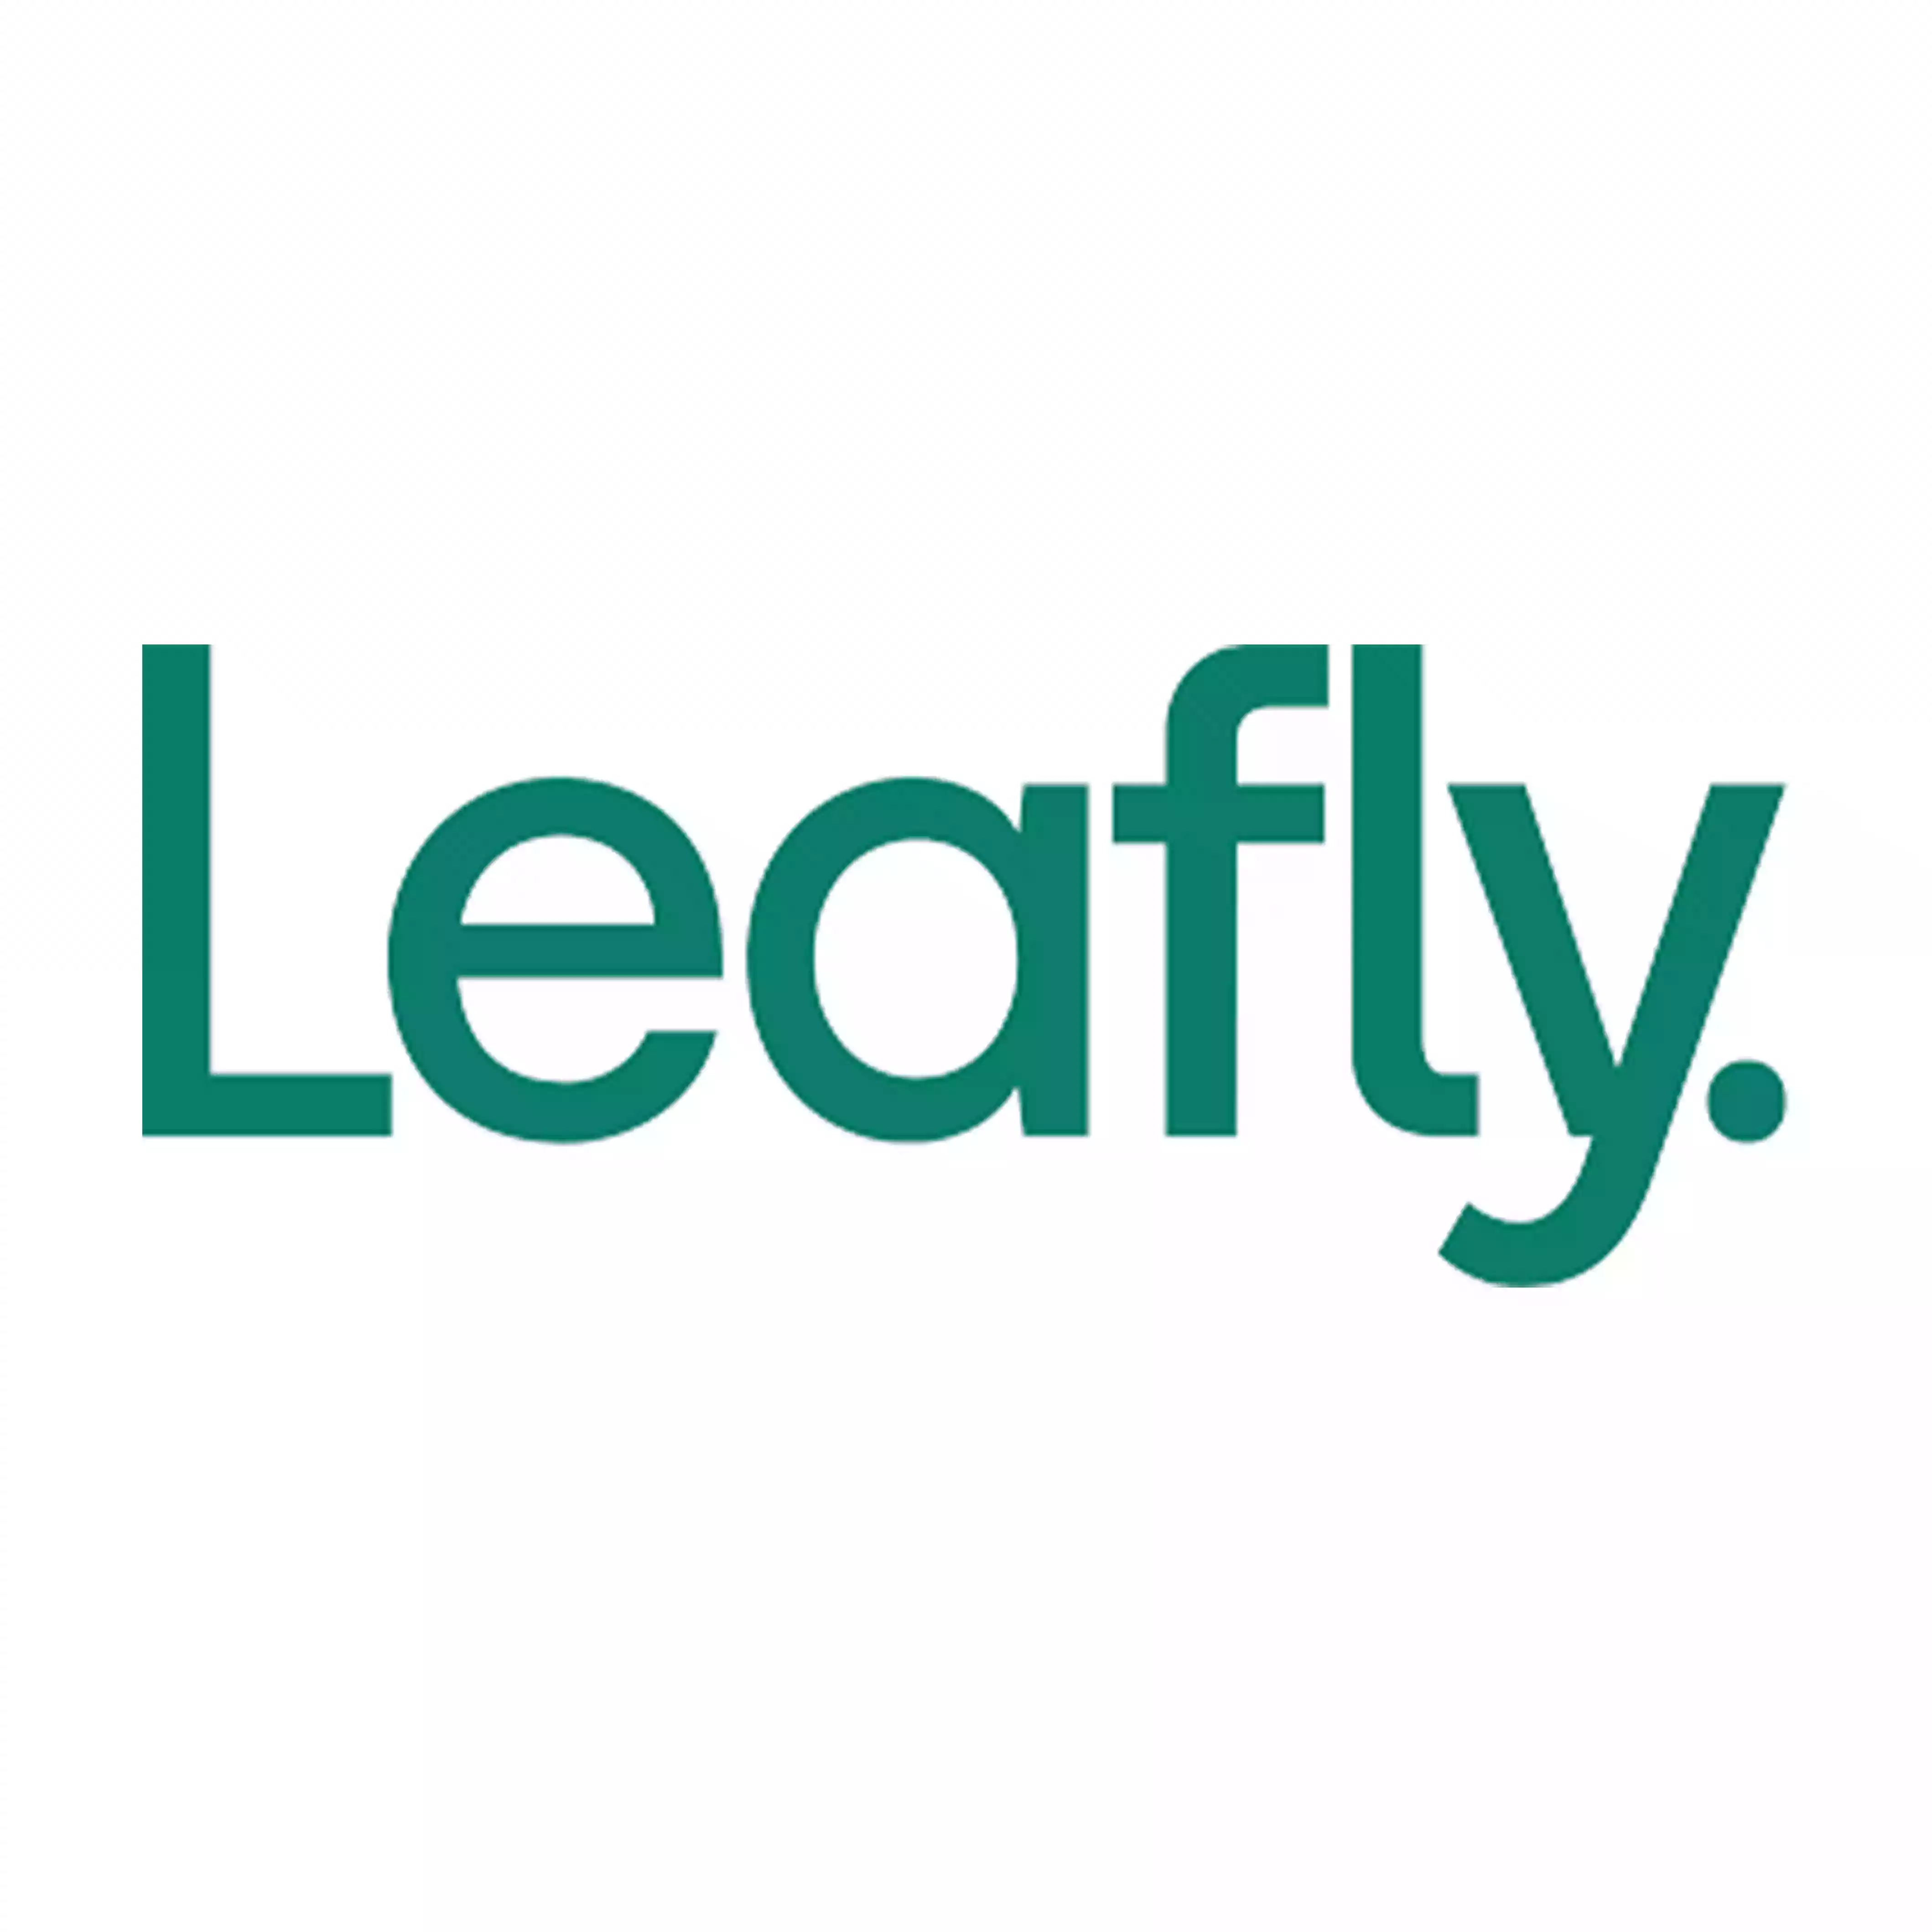 Leafly coupon codes